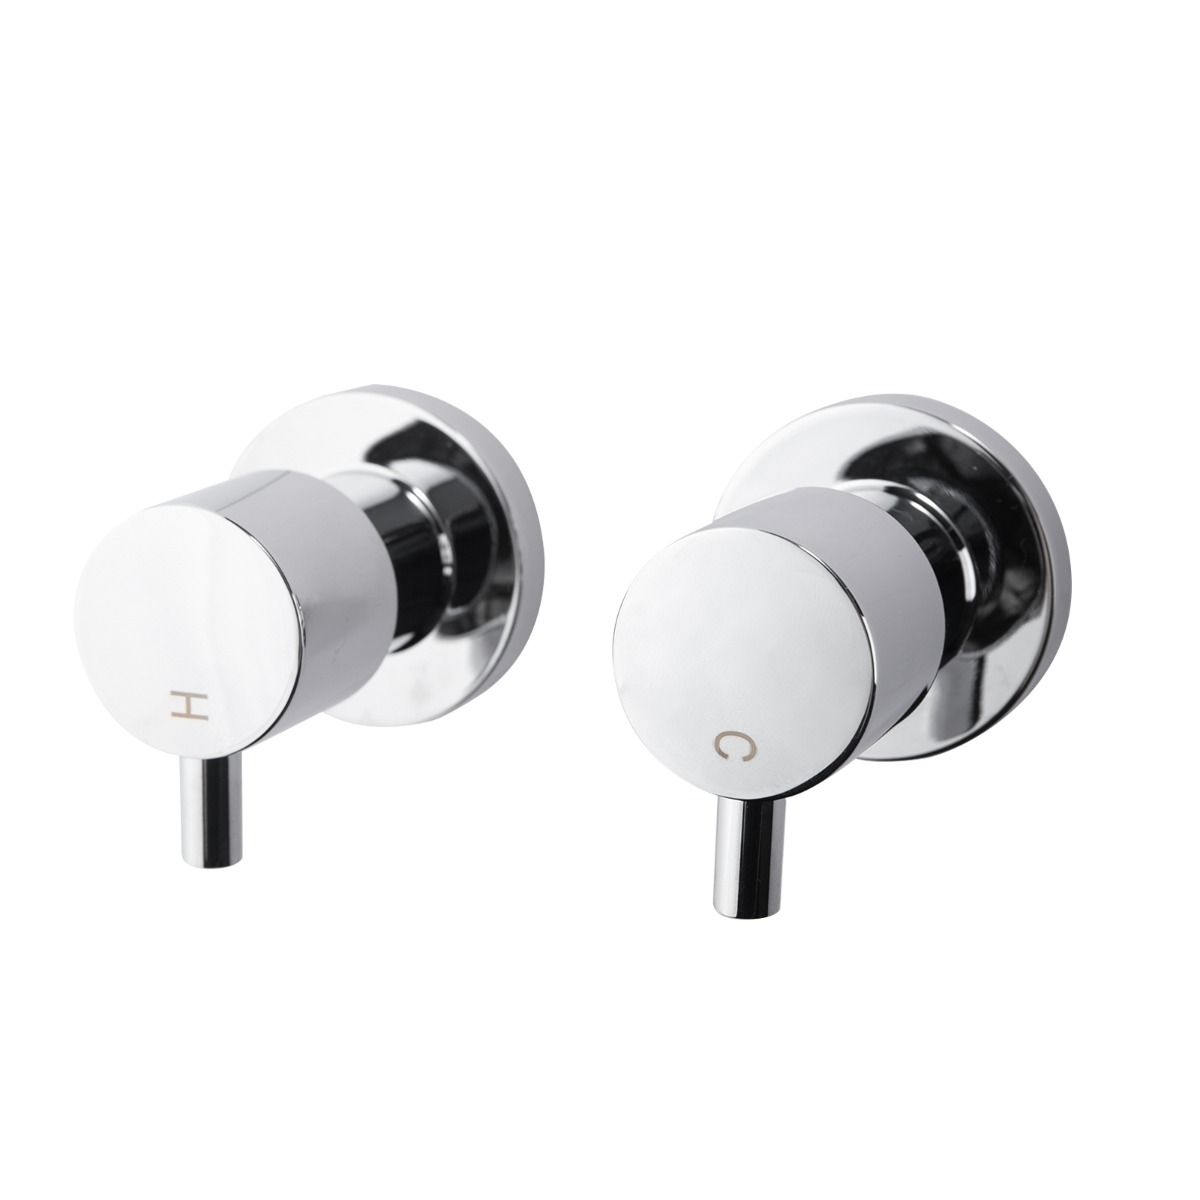 LUCID PIN Round Chrome Shower Wall Taps